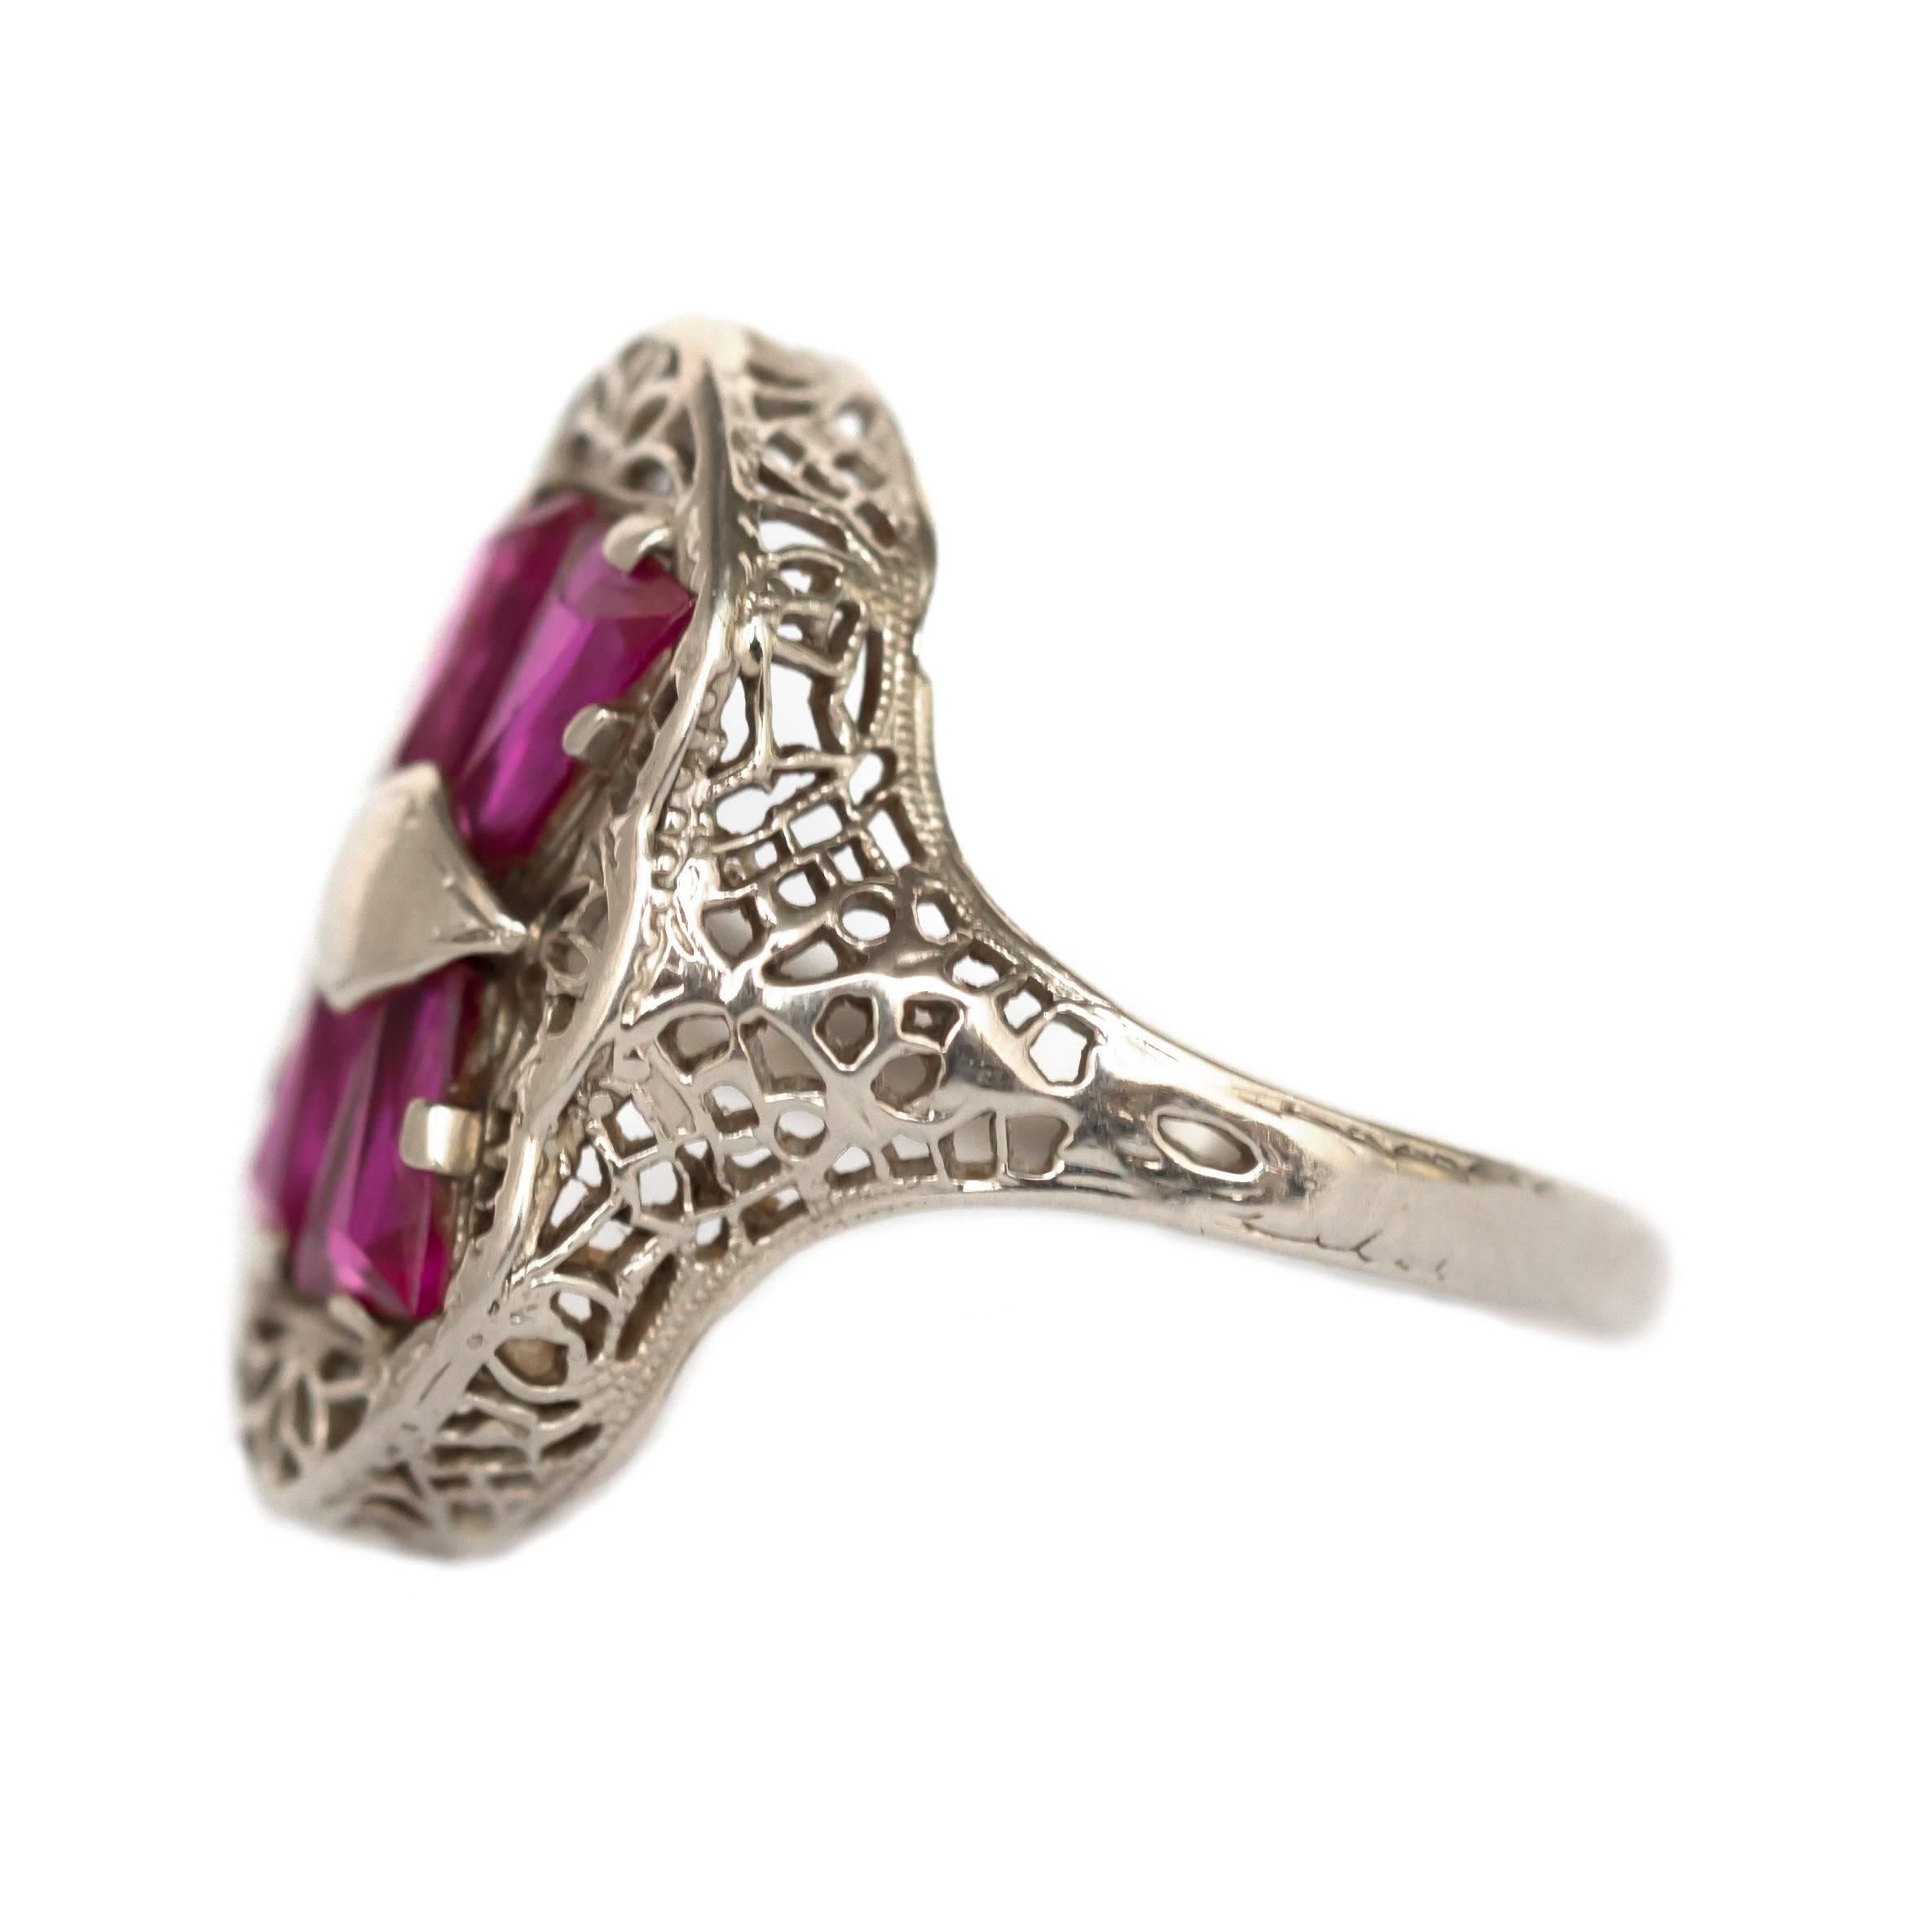 Item Details: 
Ring Size: 8.25
Metal Type: 14 Karat White Gold 
Weight: 2.9 grams

Color Stone Details: 
Type: Synthetic Ruby
Shape: Tapered Step Cut
Carat Weight: .75 carat, total weight.
Color: Deep Red

Finger to Top of Stone Measurement: 5.79mm